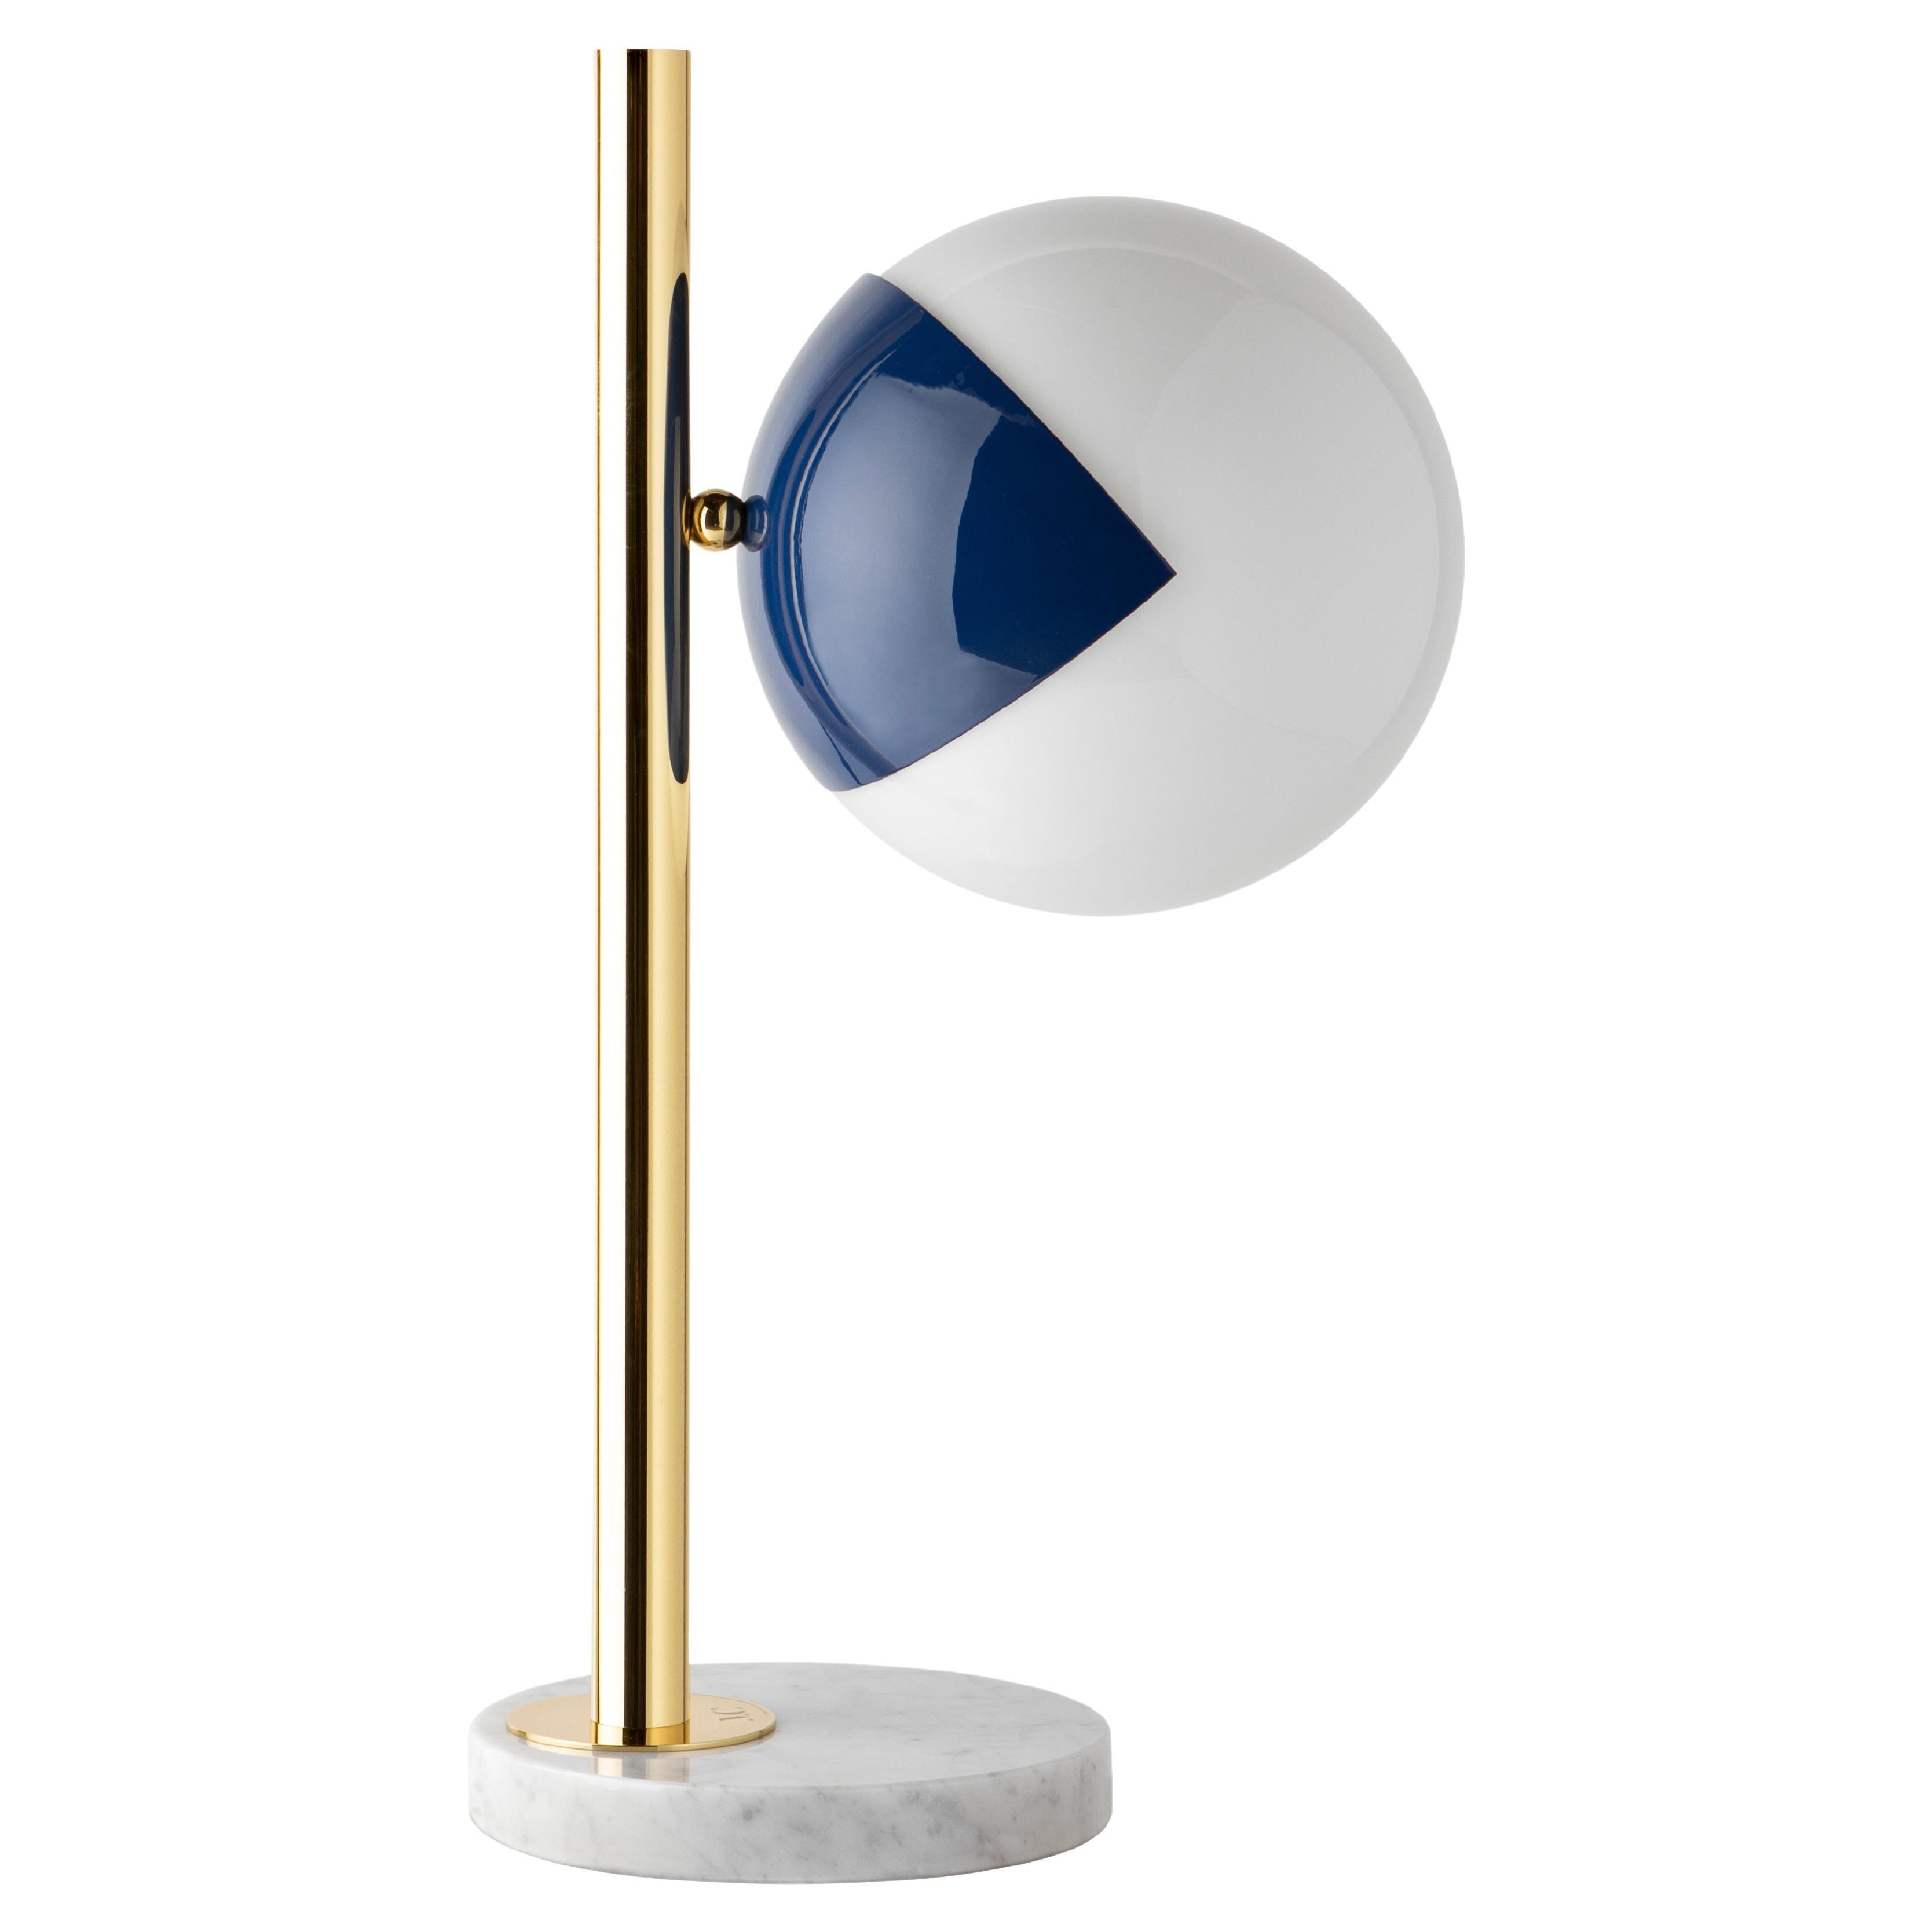 Yellow table lamp pop-up dimmable by Magic Circus Editions.
Dimensions: Ø 22 x 30 x 53 cm.
Materials: carrara marble base, smooth brass tube, glossy mouth blown glass.
Also non-dimmable version available.

All our lamps can be wired according